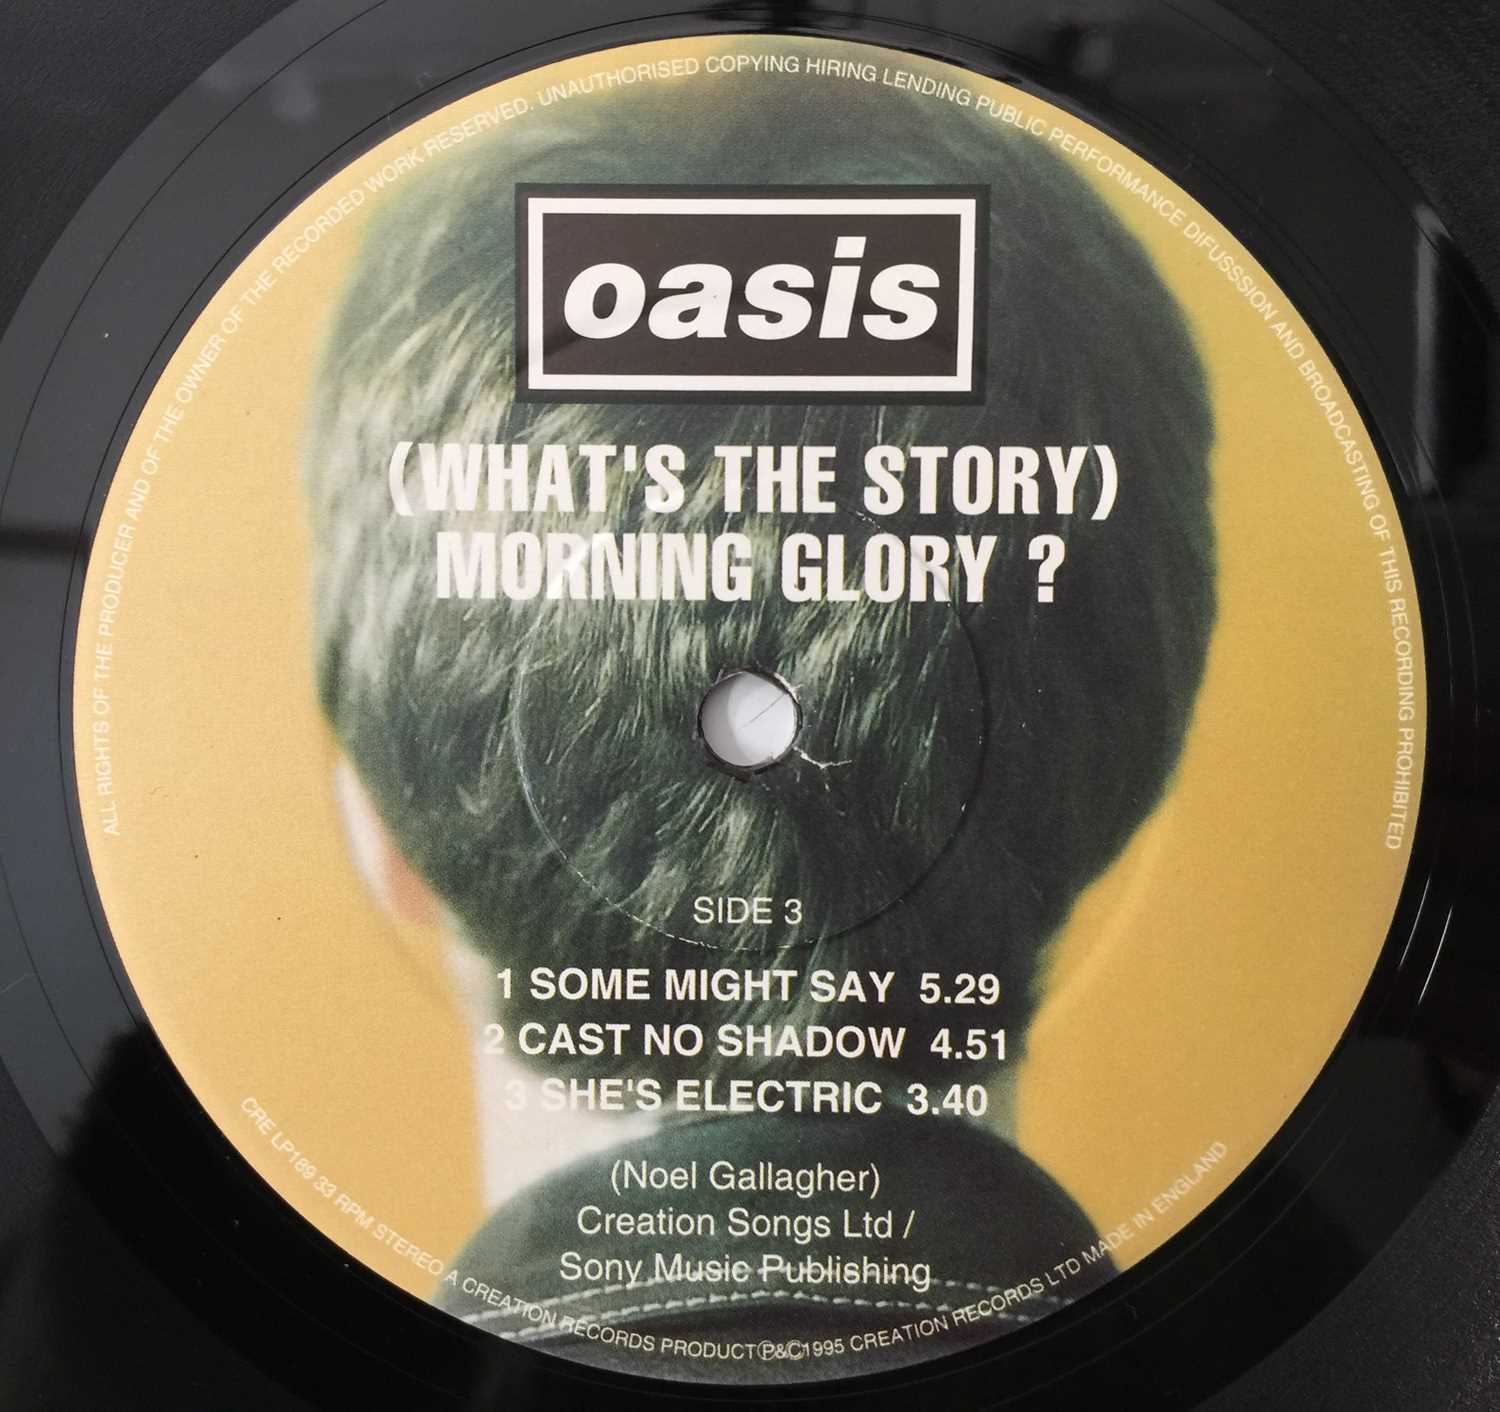 OASIS - (WHAT'S THE STORY) MORNING GLORY? LP (ORIGINAL UK COPY - CREATION CRE LP 189) - Image 5 of 7